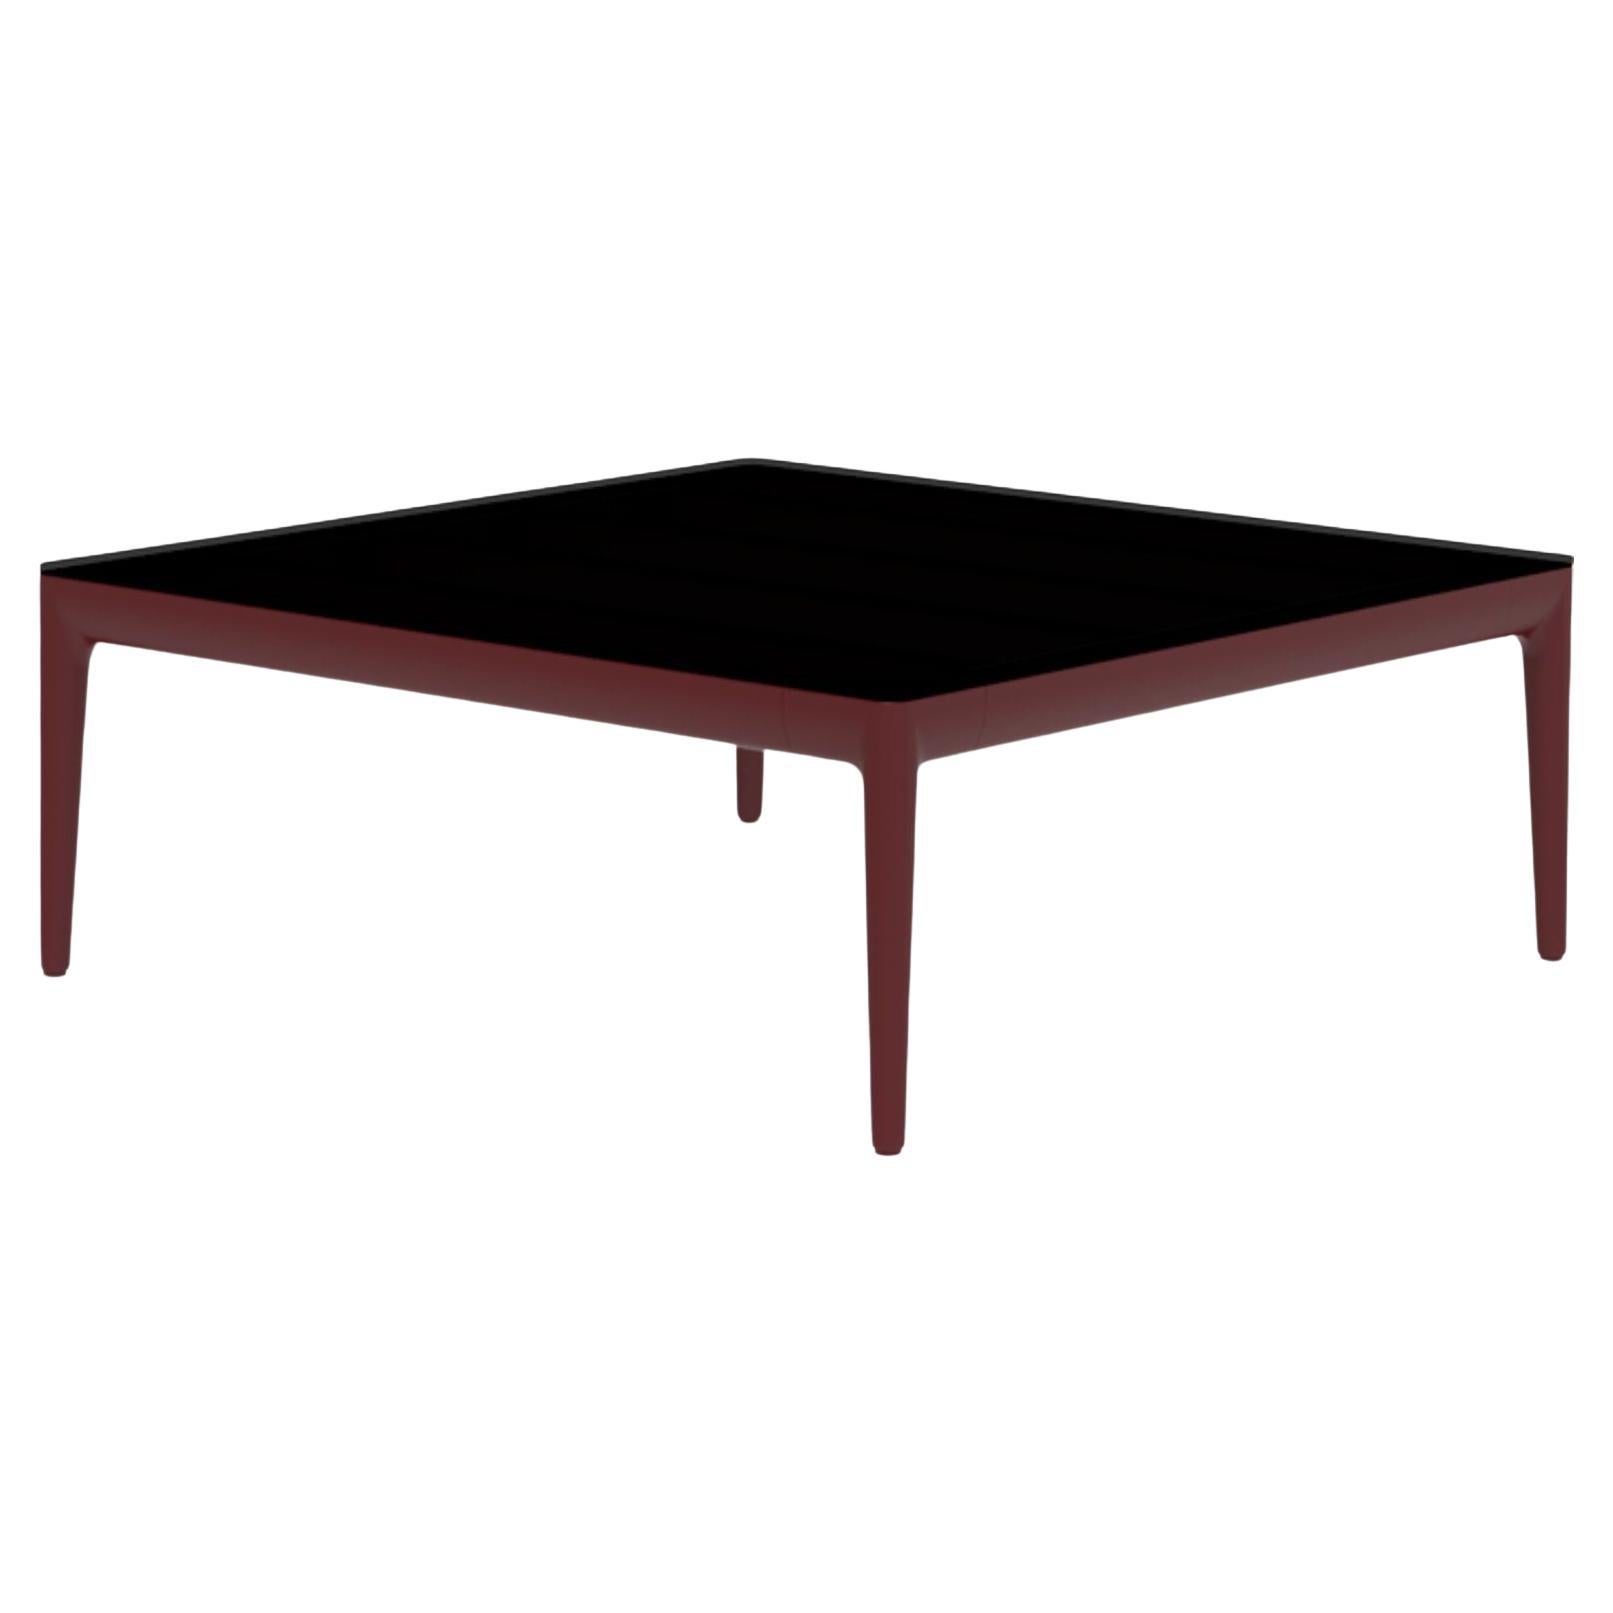 Ribbons Burgundy 76 Coffee Table by Mowee For Sale